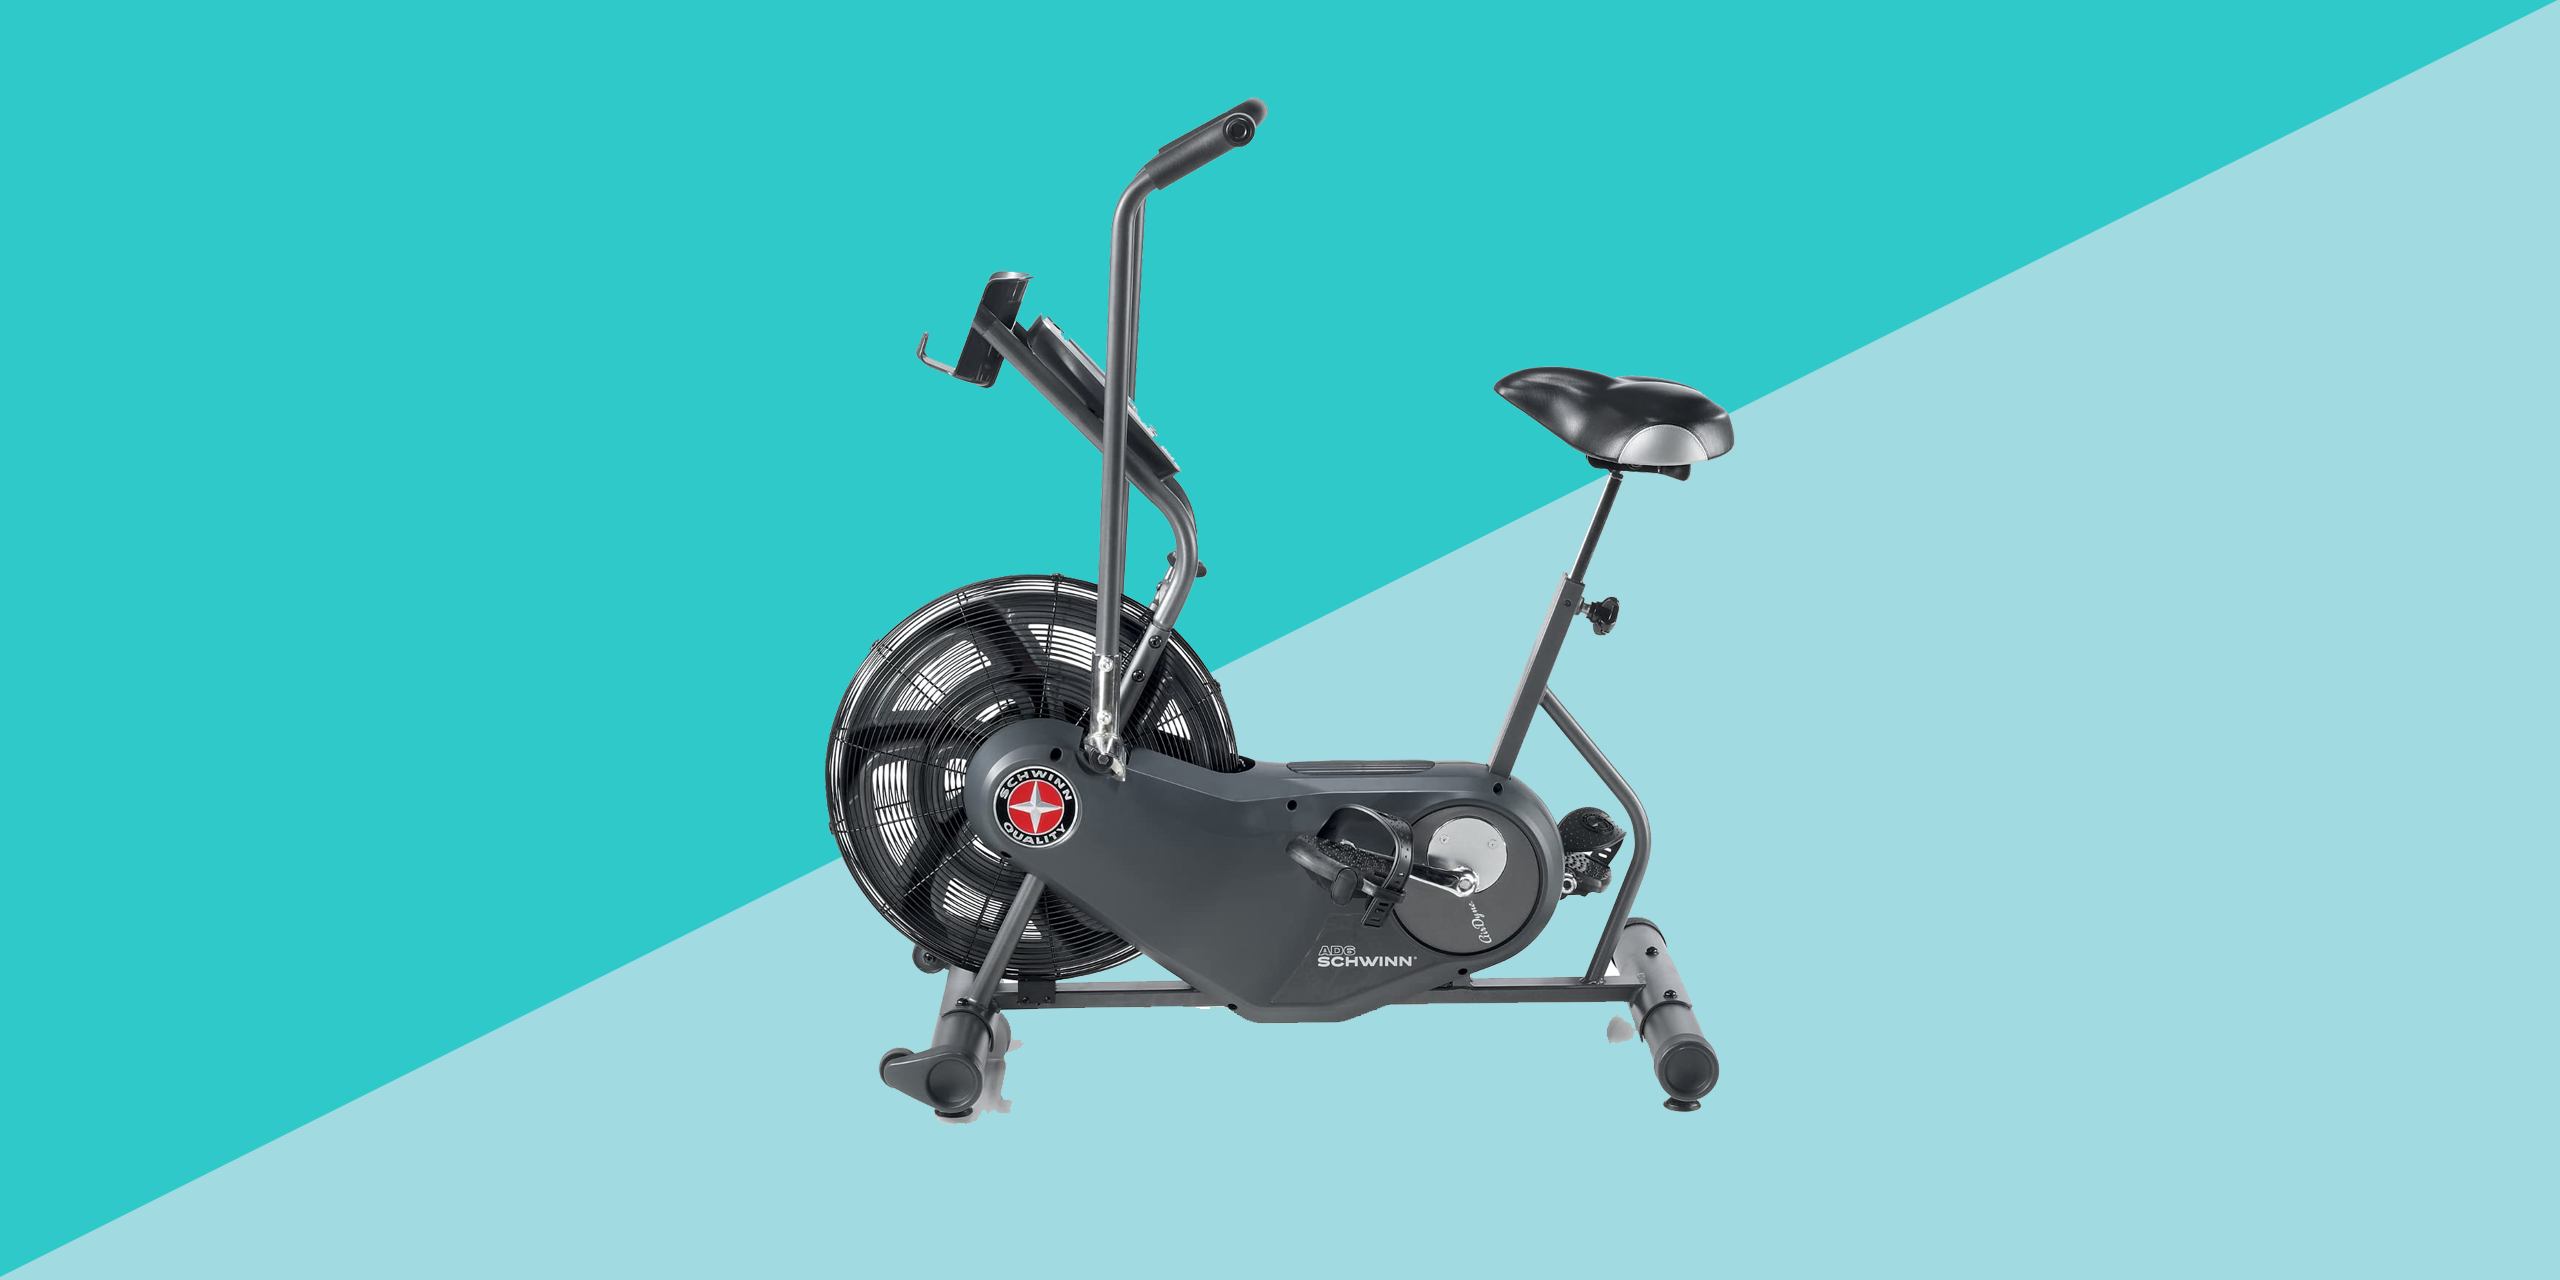 What are the great benefits of exercise bikes?